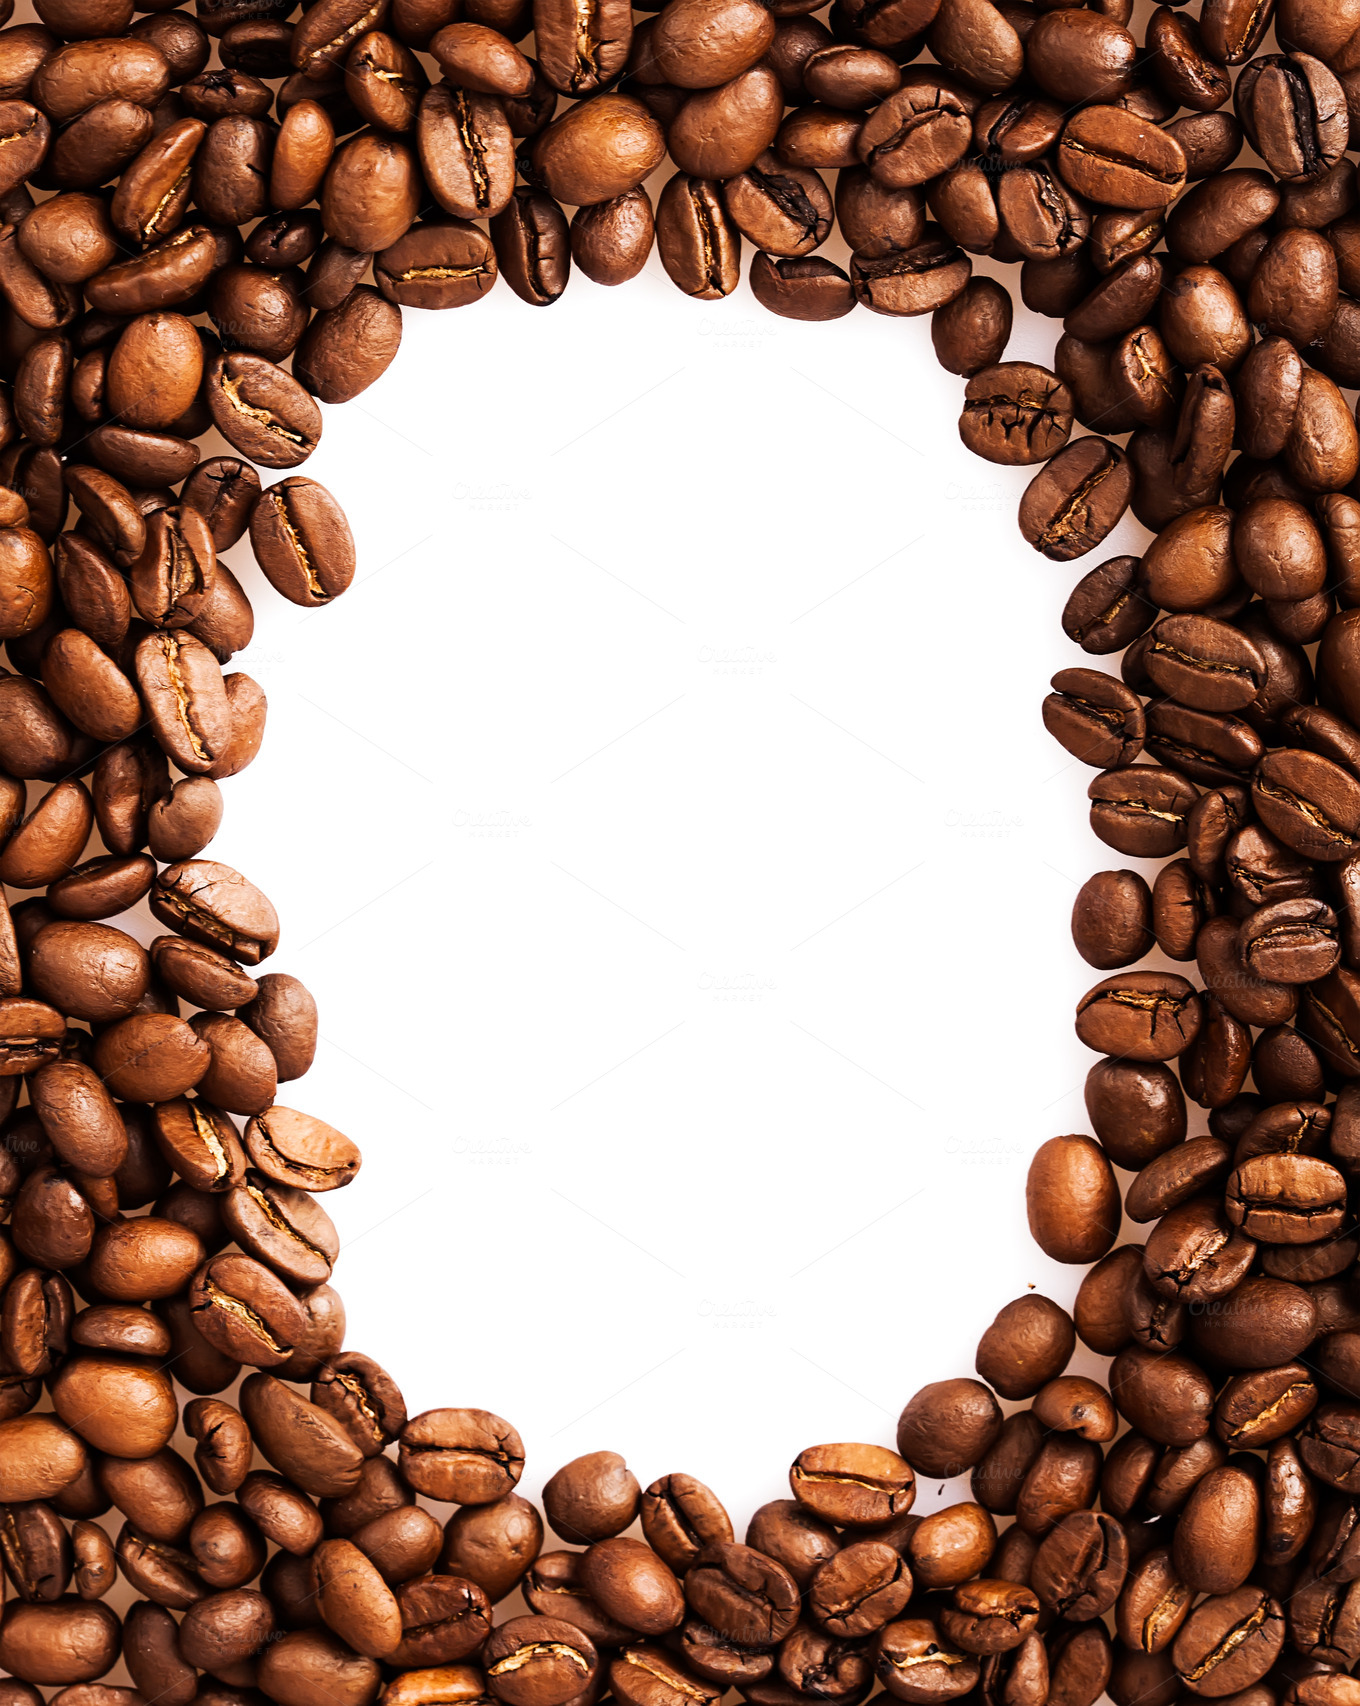 Coffee beans frame background Food amp Drink Photos on